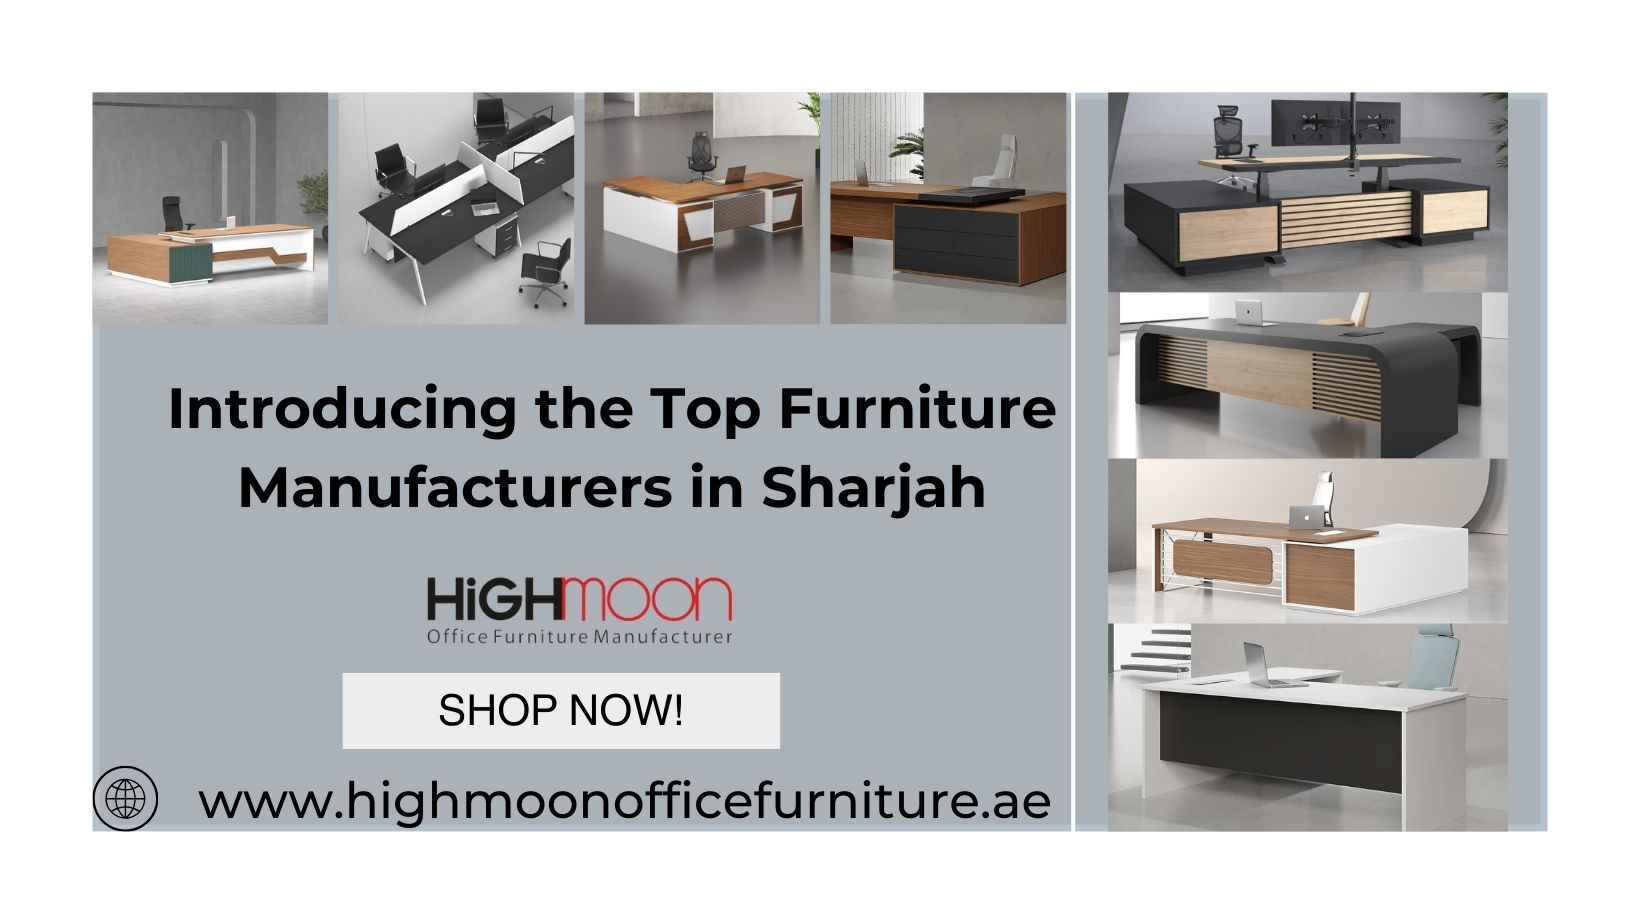 Introducing the Top Furniture Manufacturers in Sharjah